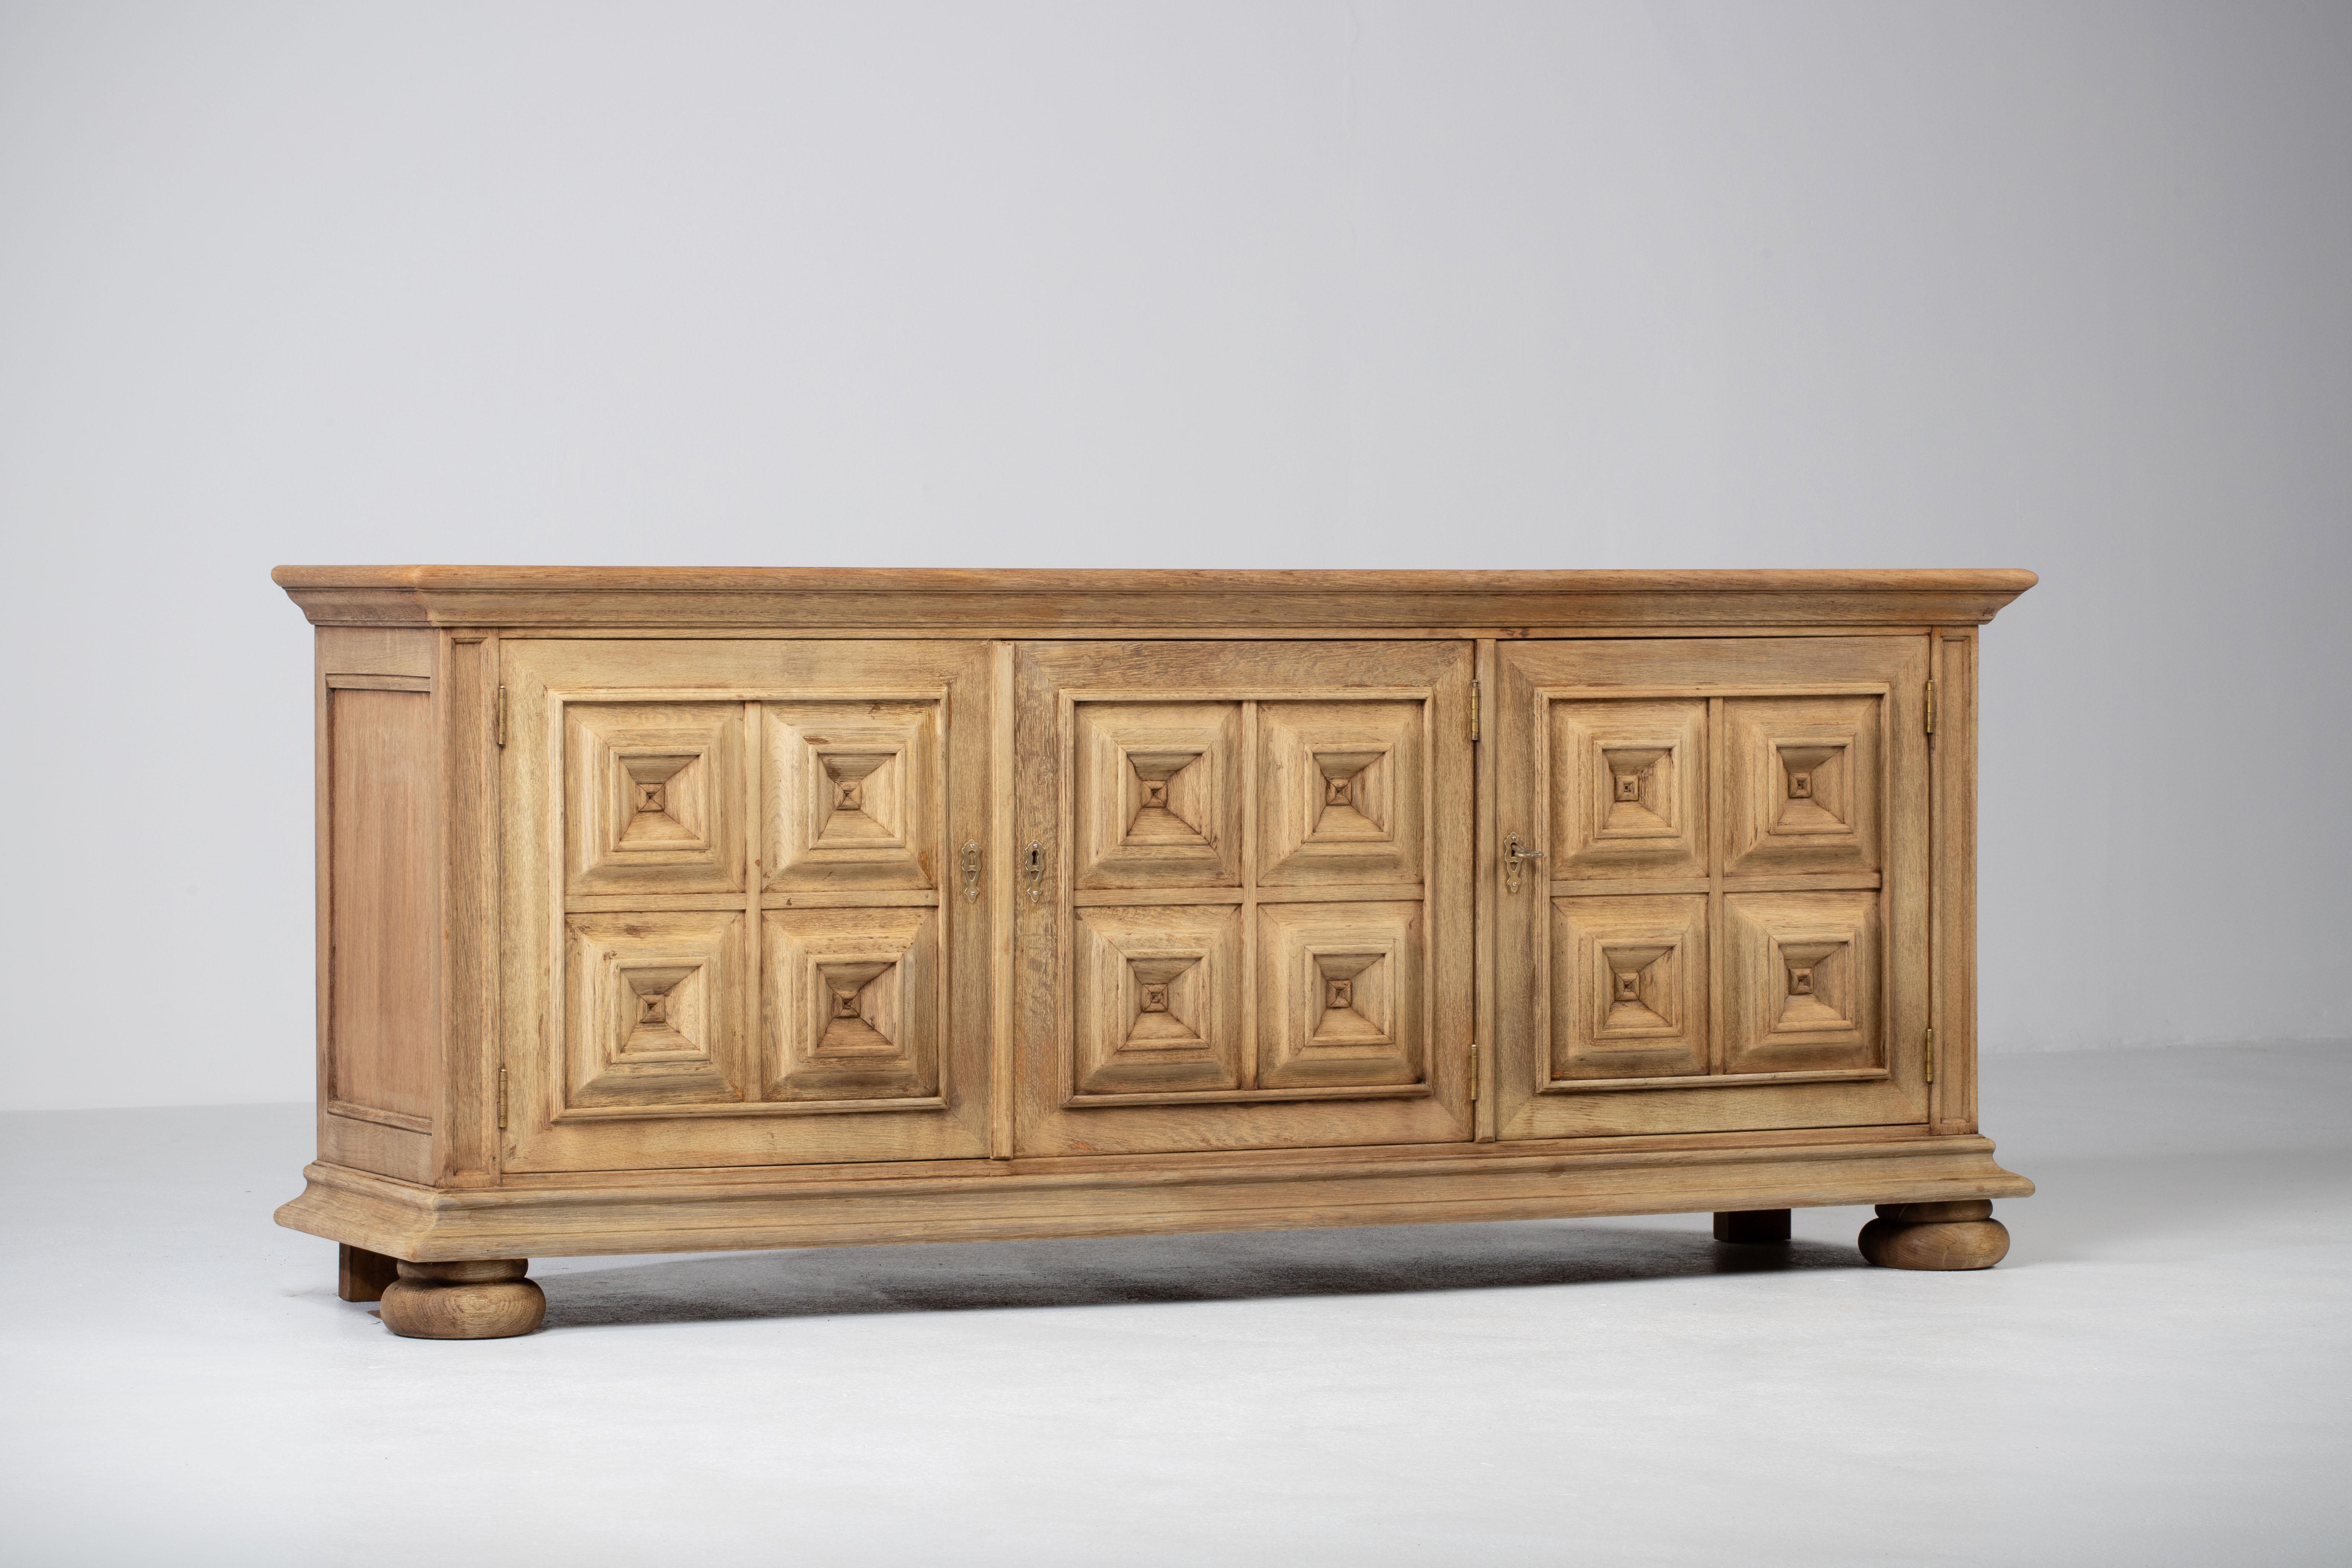 Mid-20th Century Brutalist Solid Oak Sideboard, Spanish Colonial, 1940s